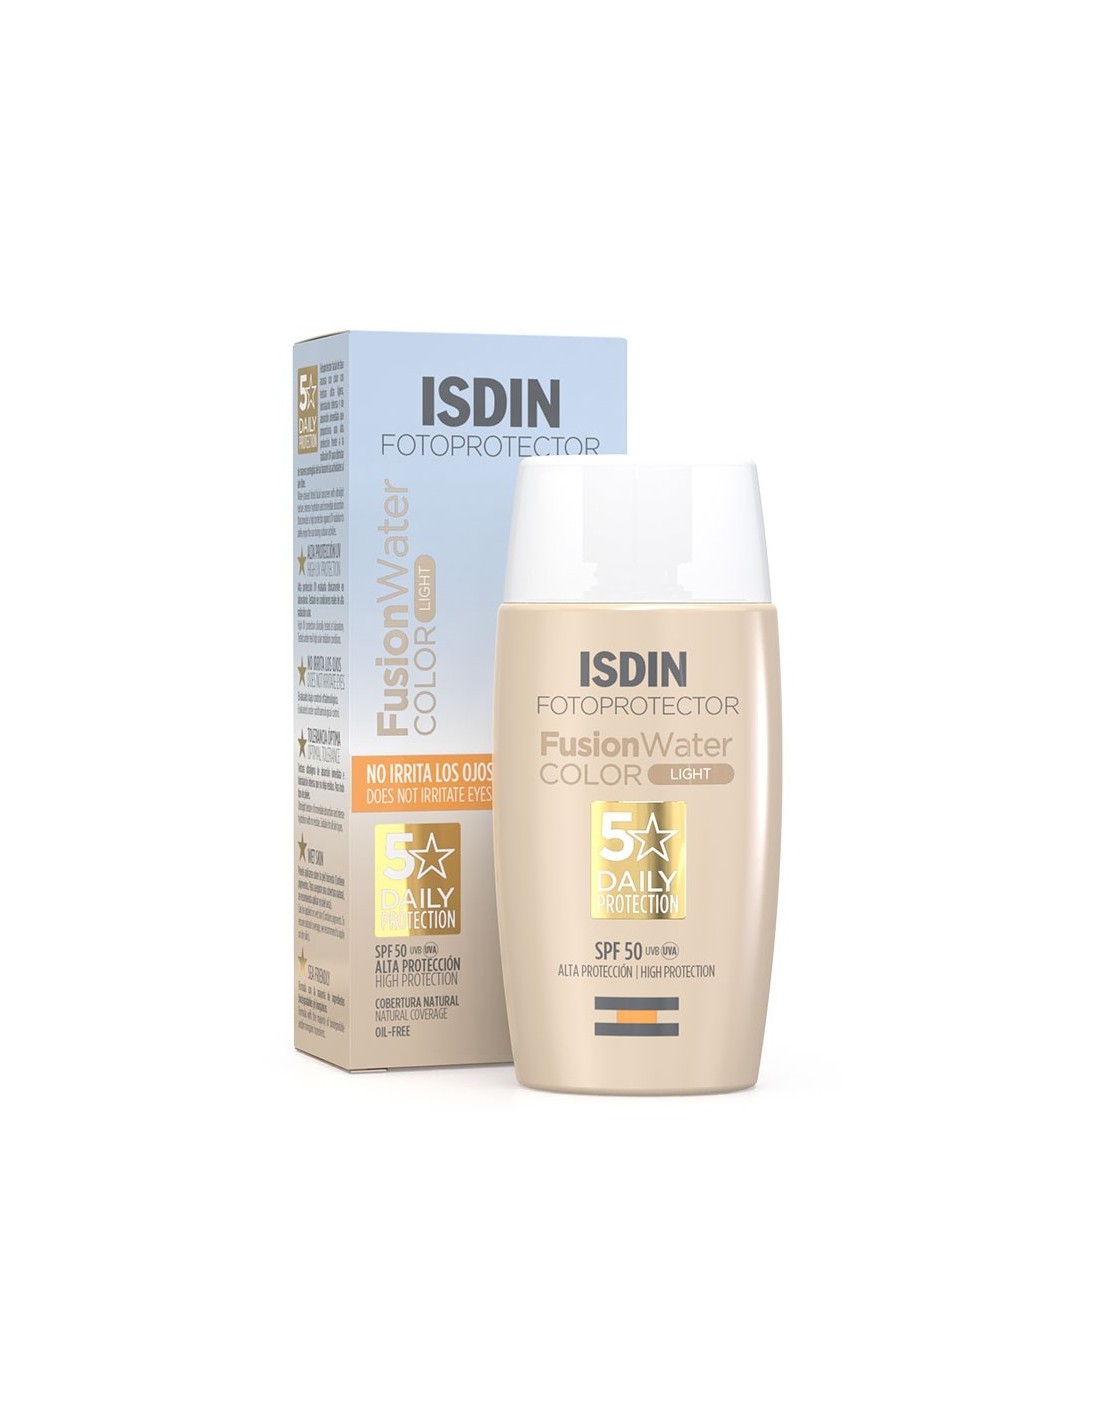 Isdin Fotoprotector Fusion Water Color Light Claro SPF50 50ml